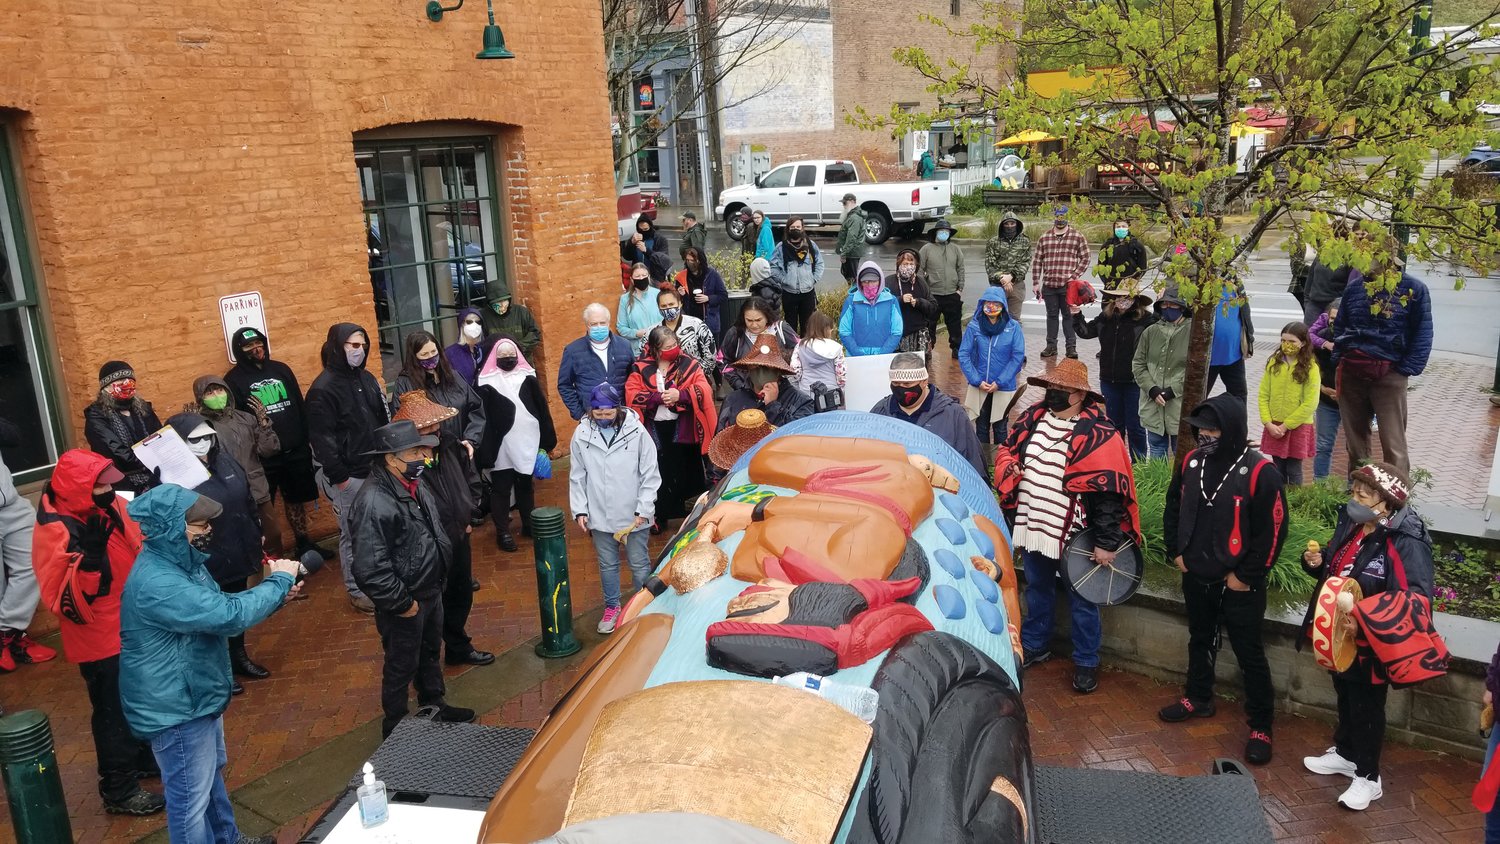 The crowd gathers for a blessing ceremony for the House of Tears carvers' newest totem pole. Members of the Port Gamble S'Klallam Tribe sang traditional songs in honor of the occasion.